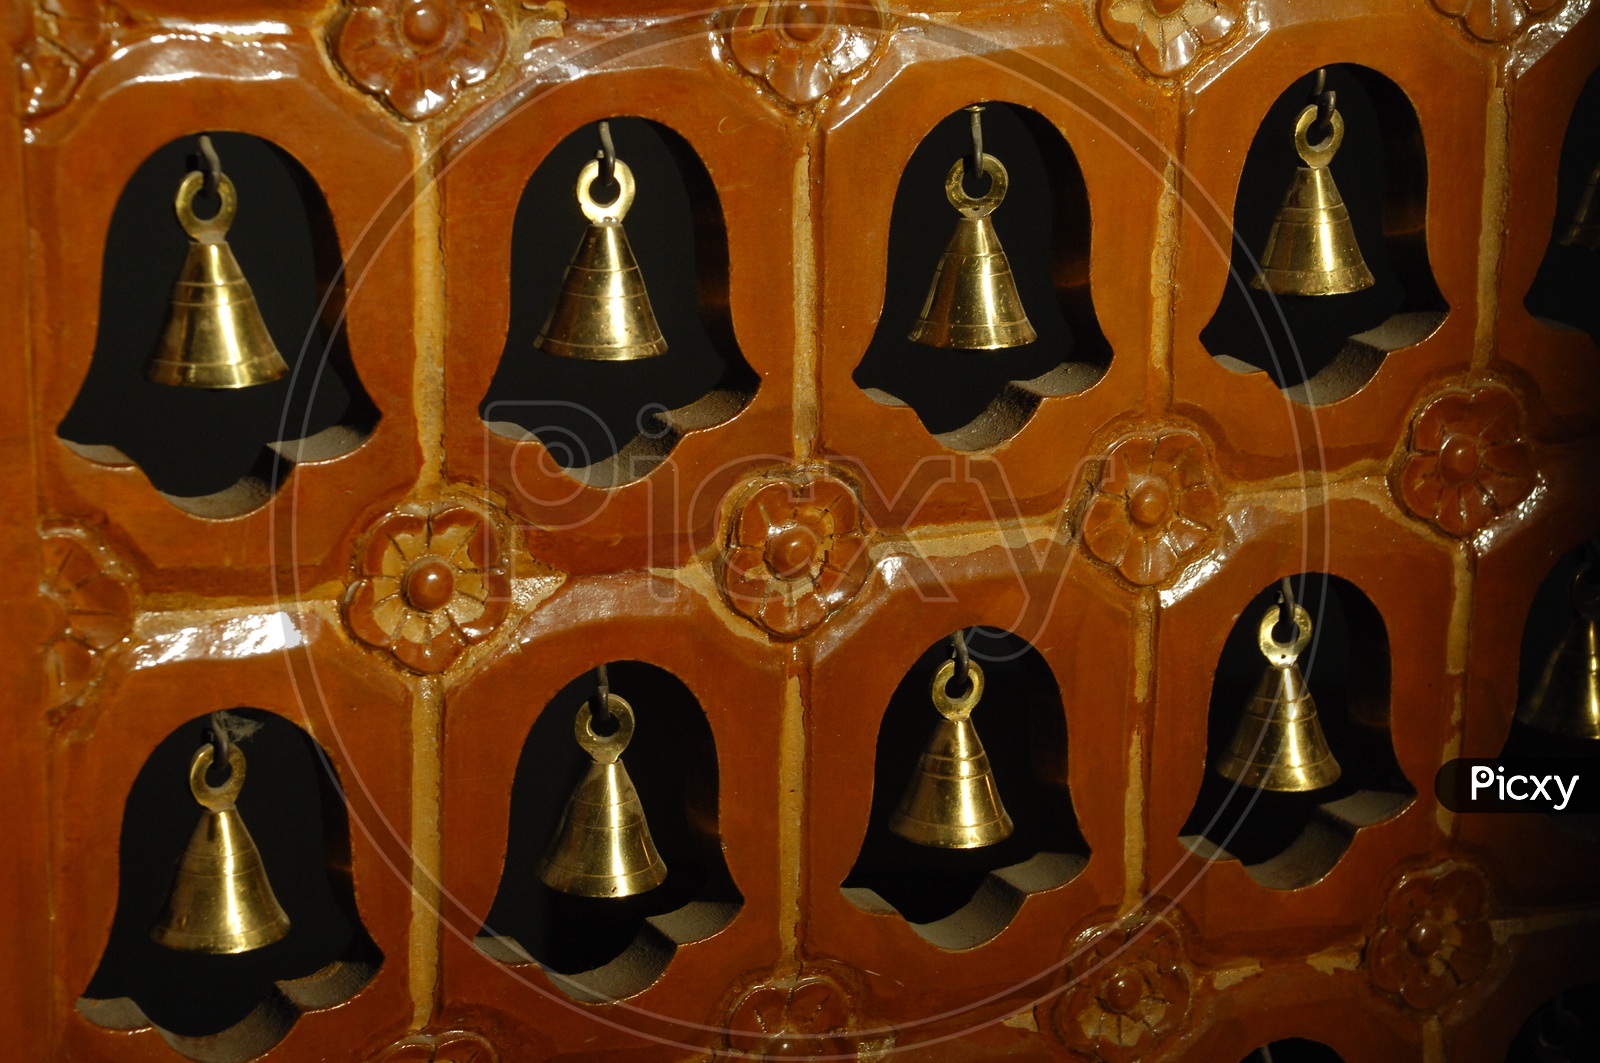 Bells in a Temple